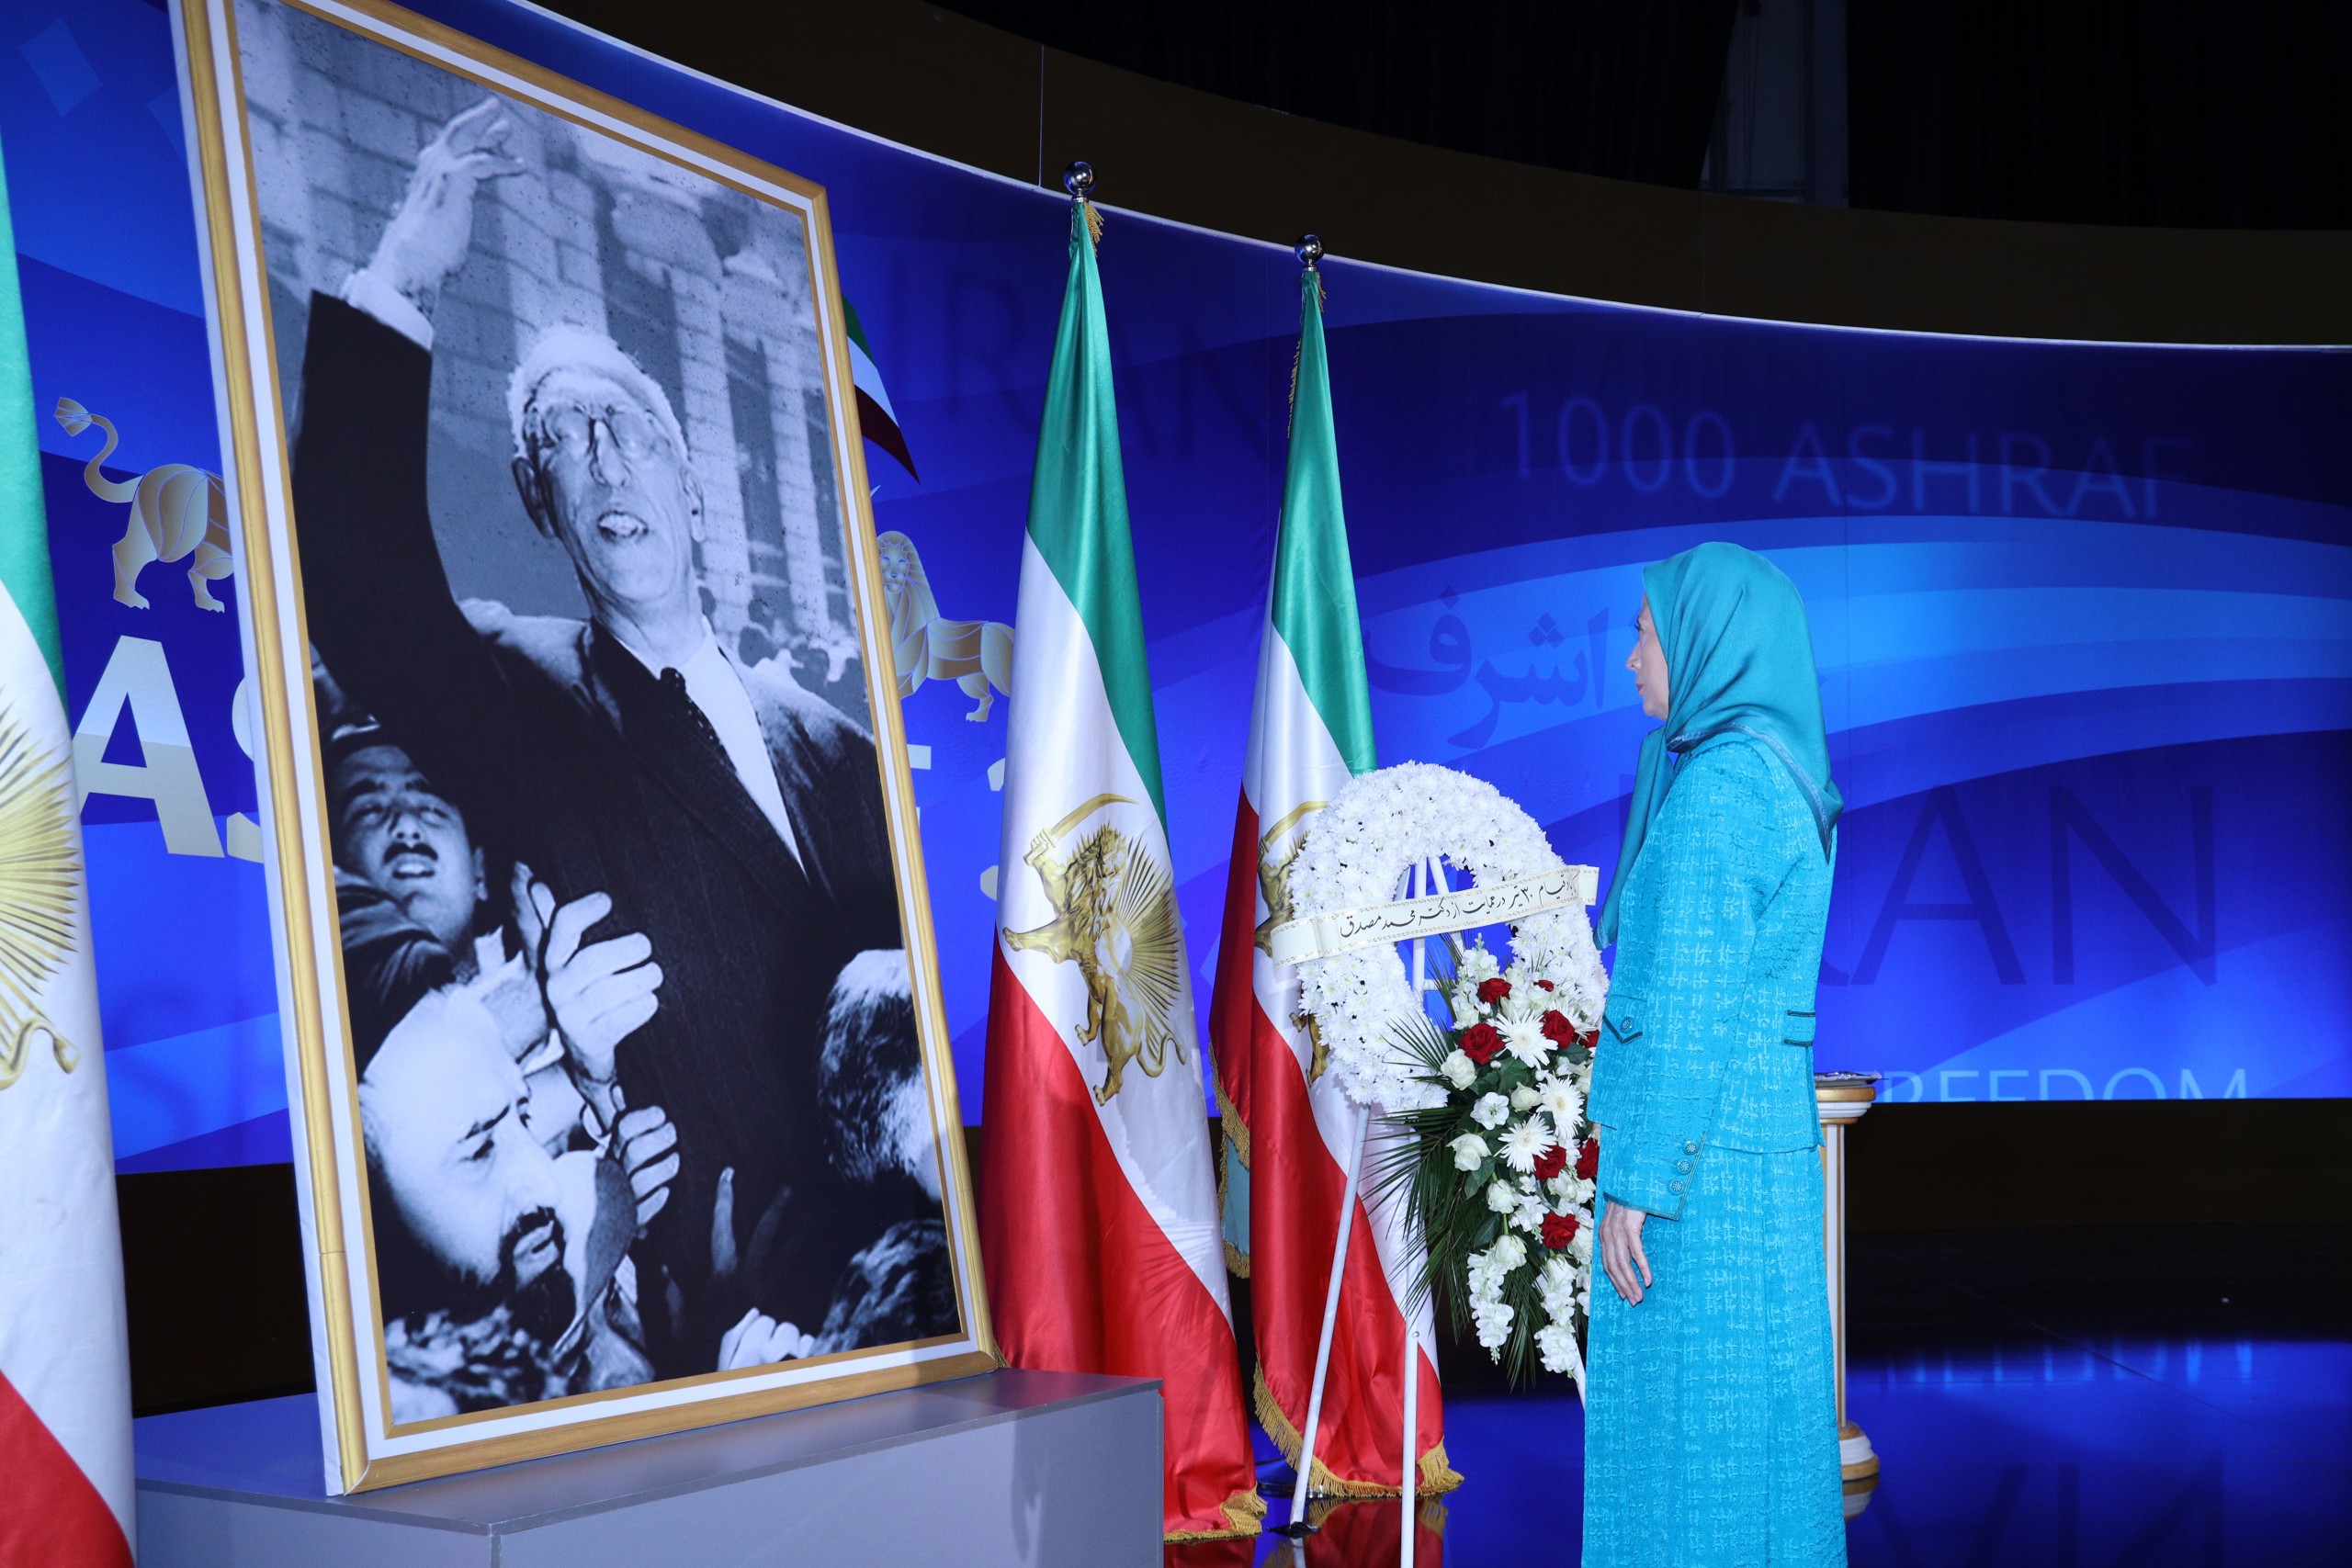 Speech on the 40th anniversary of the National Council of Resistance of Iran